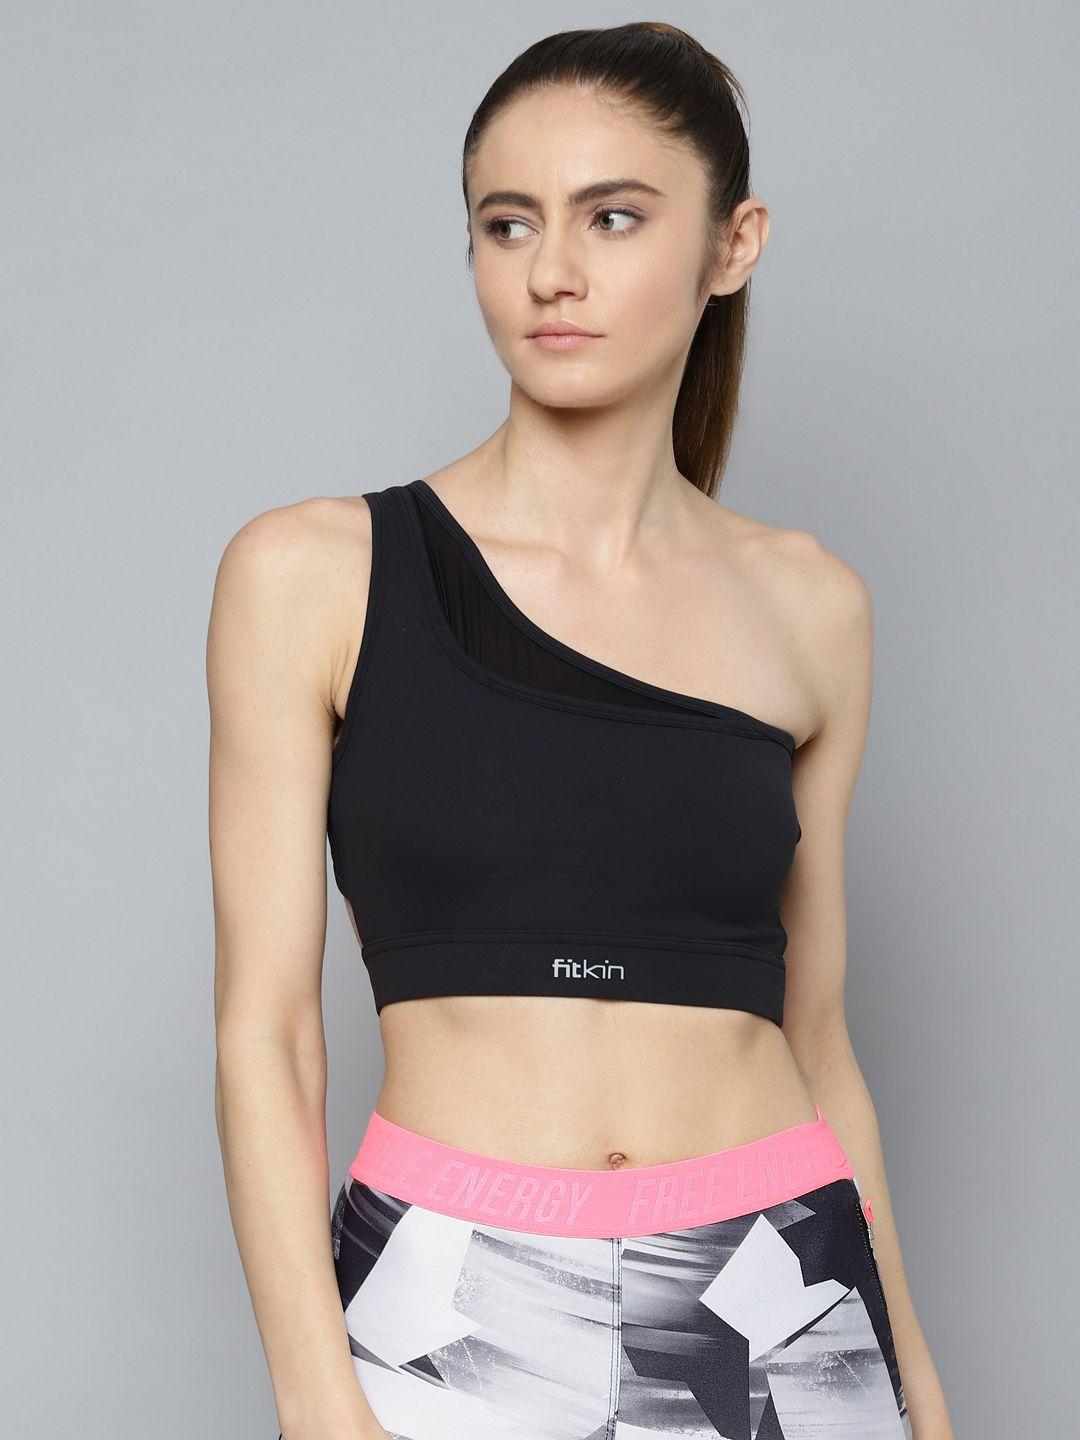 fitkin black one shoulder sports bra with front net detail